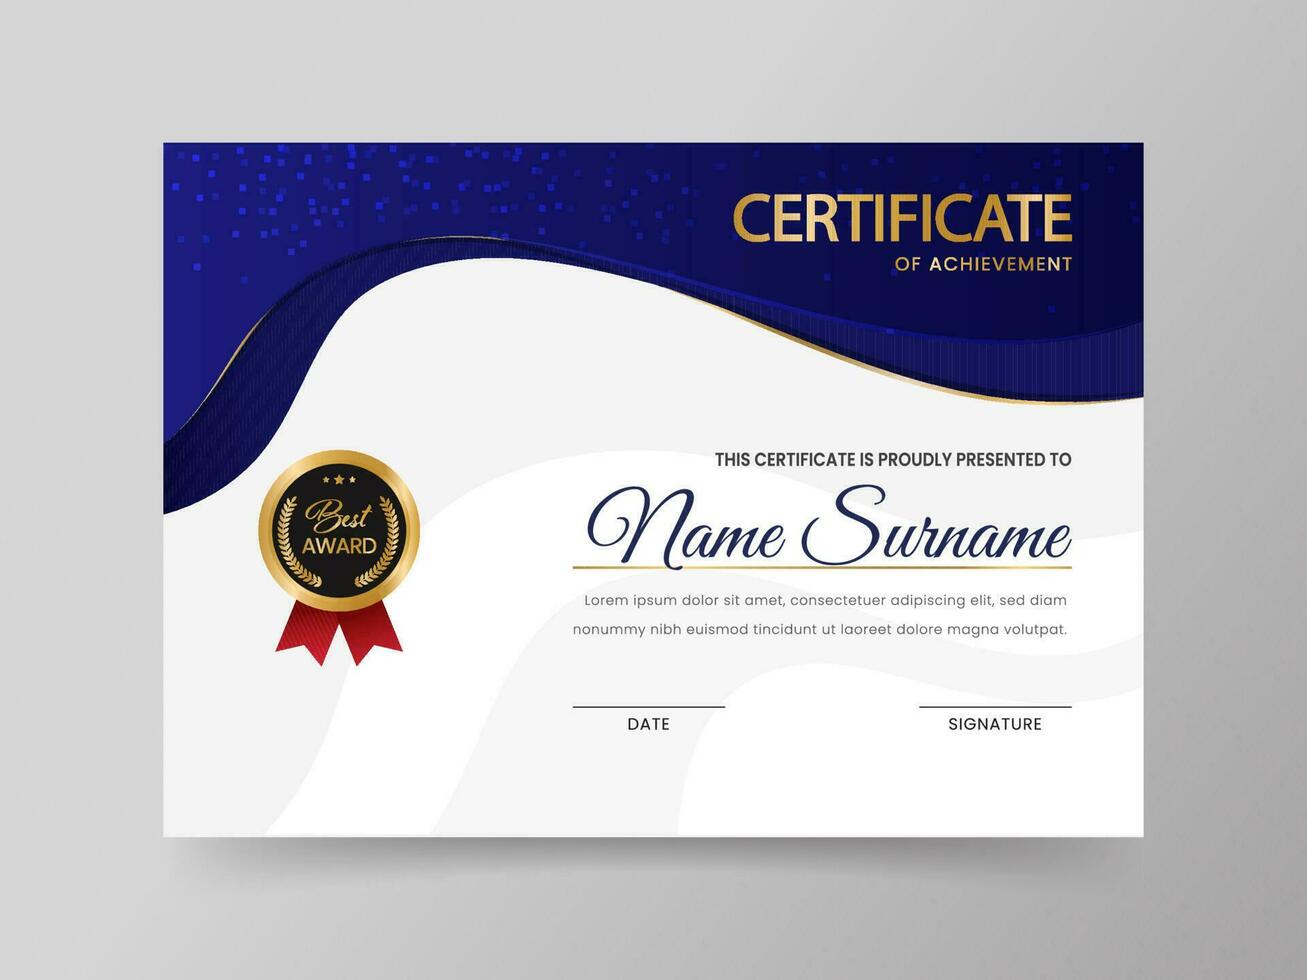 Best Award Certificate Of Achievement Template In Blue And White Color. vector